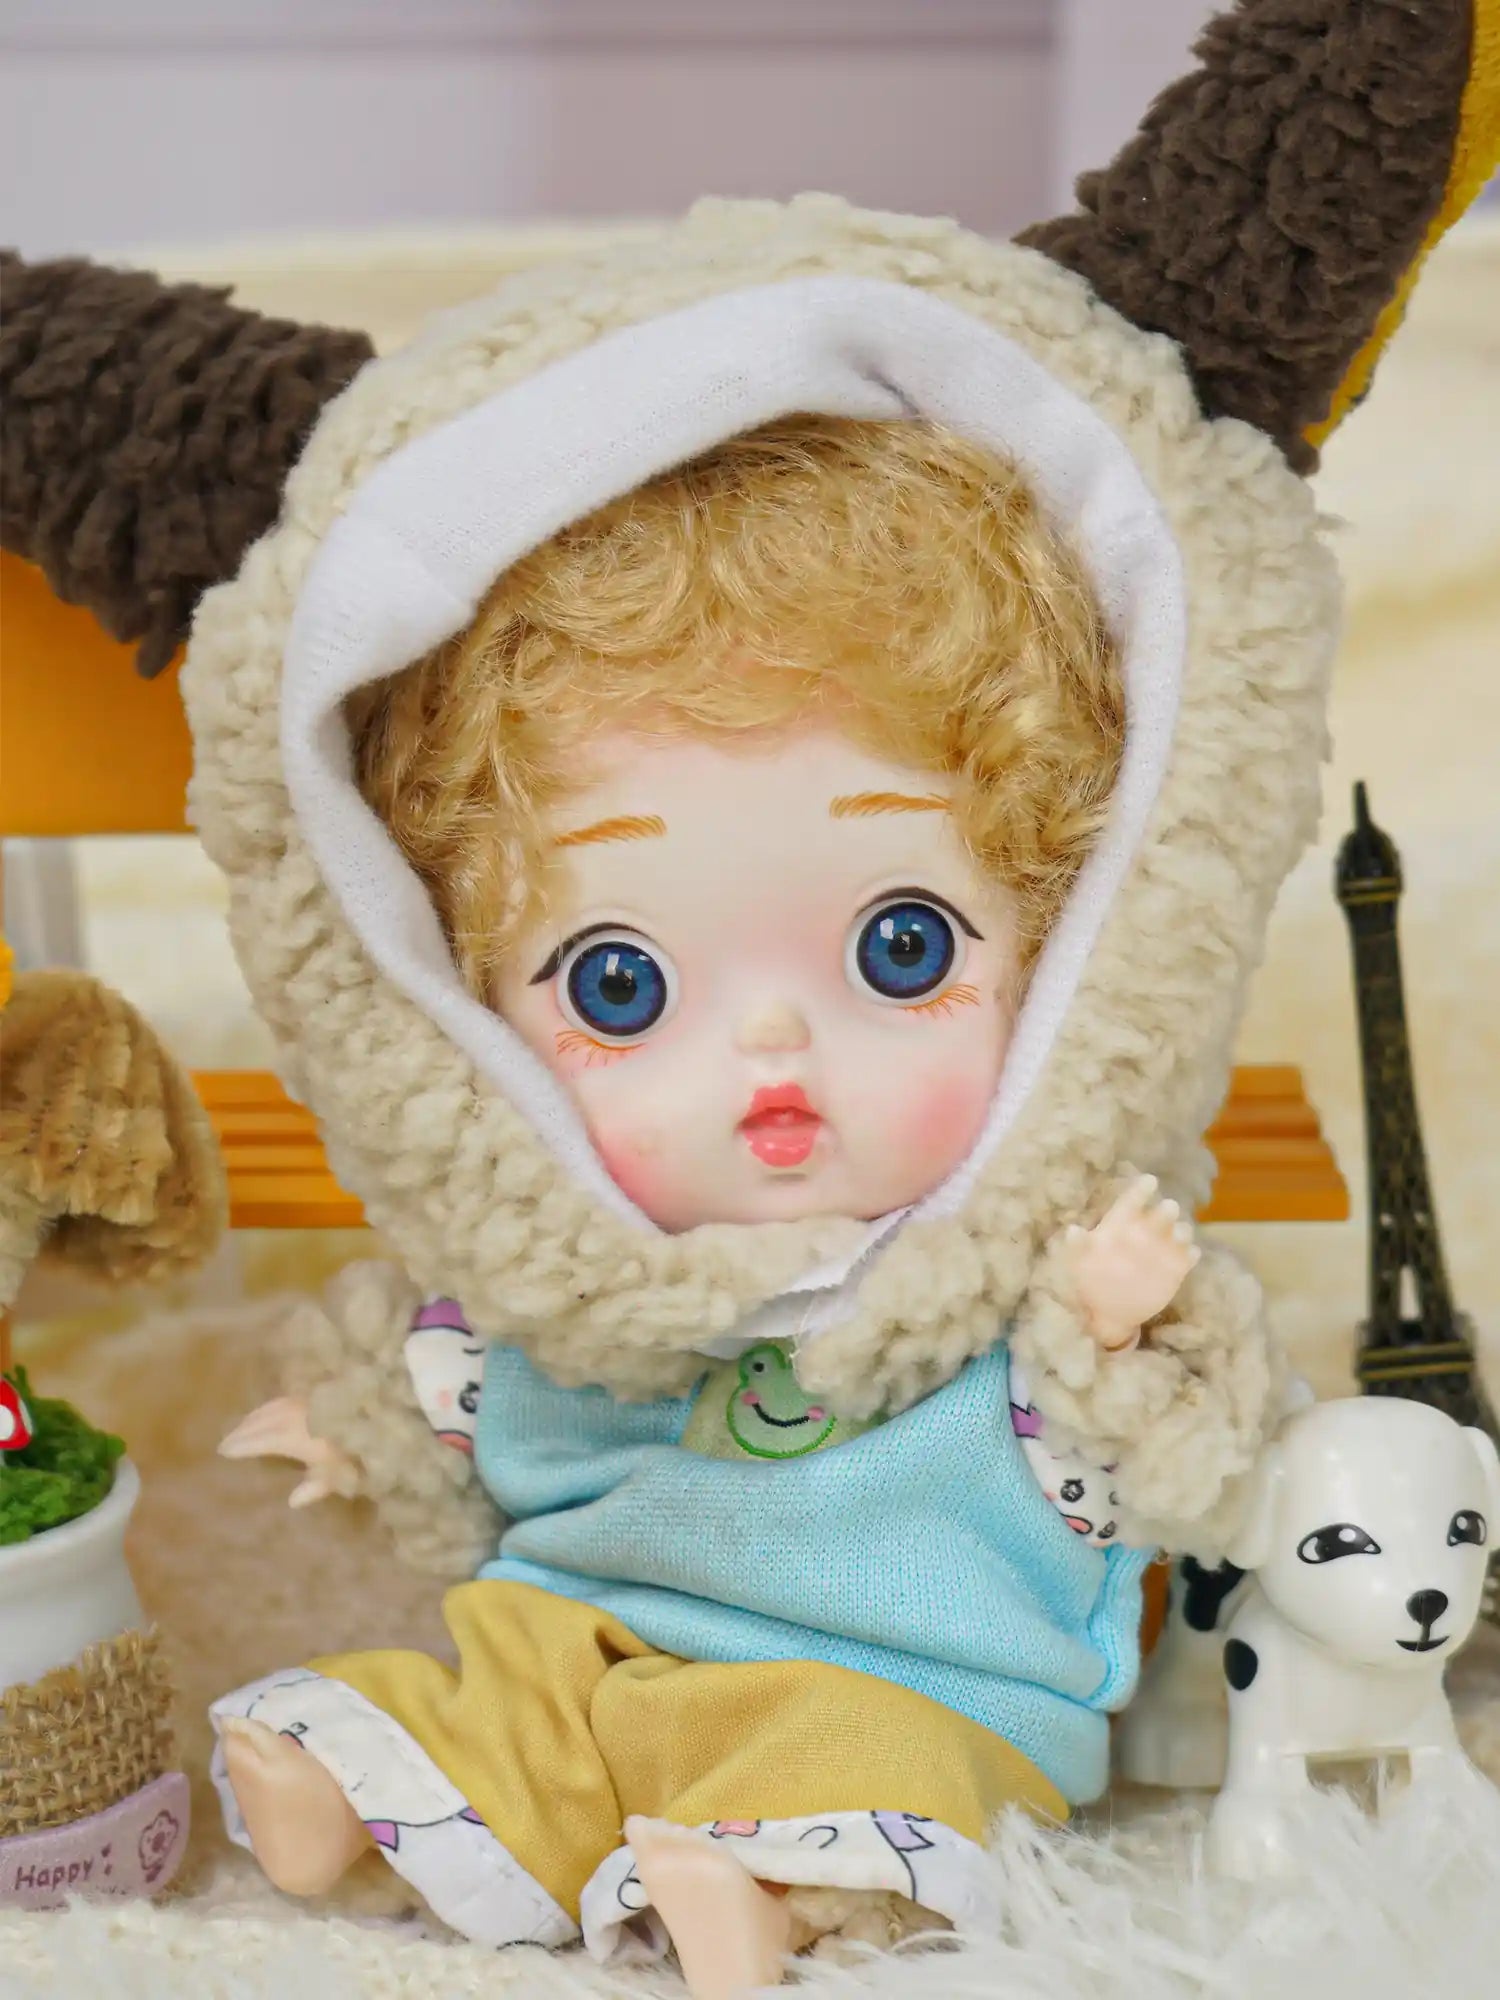 This BJD showcases a sheepish charm with its costume and is joined by a tiny Eiffel Tower and a porcelain puppy.